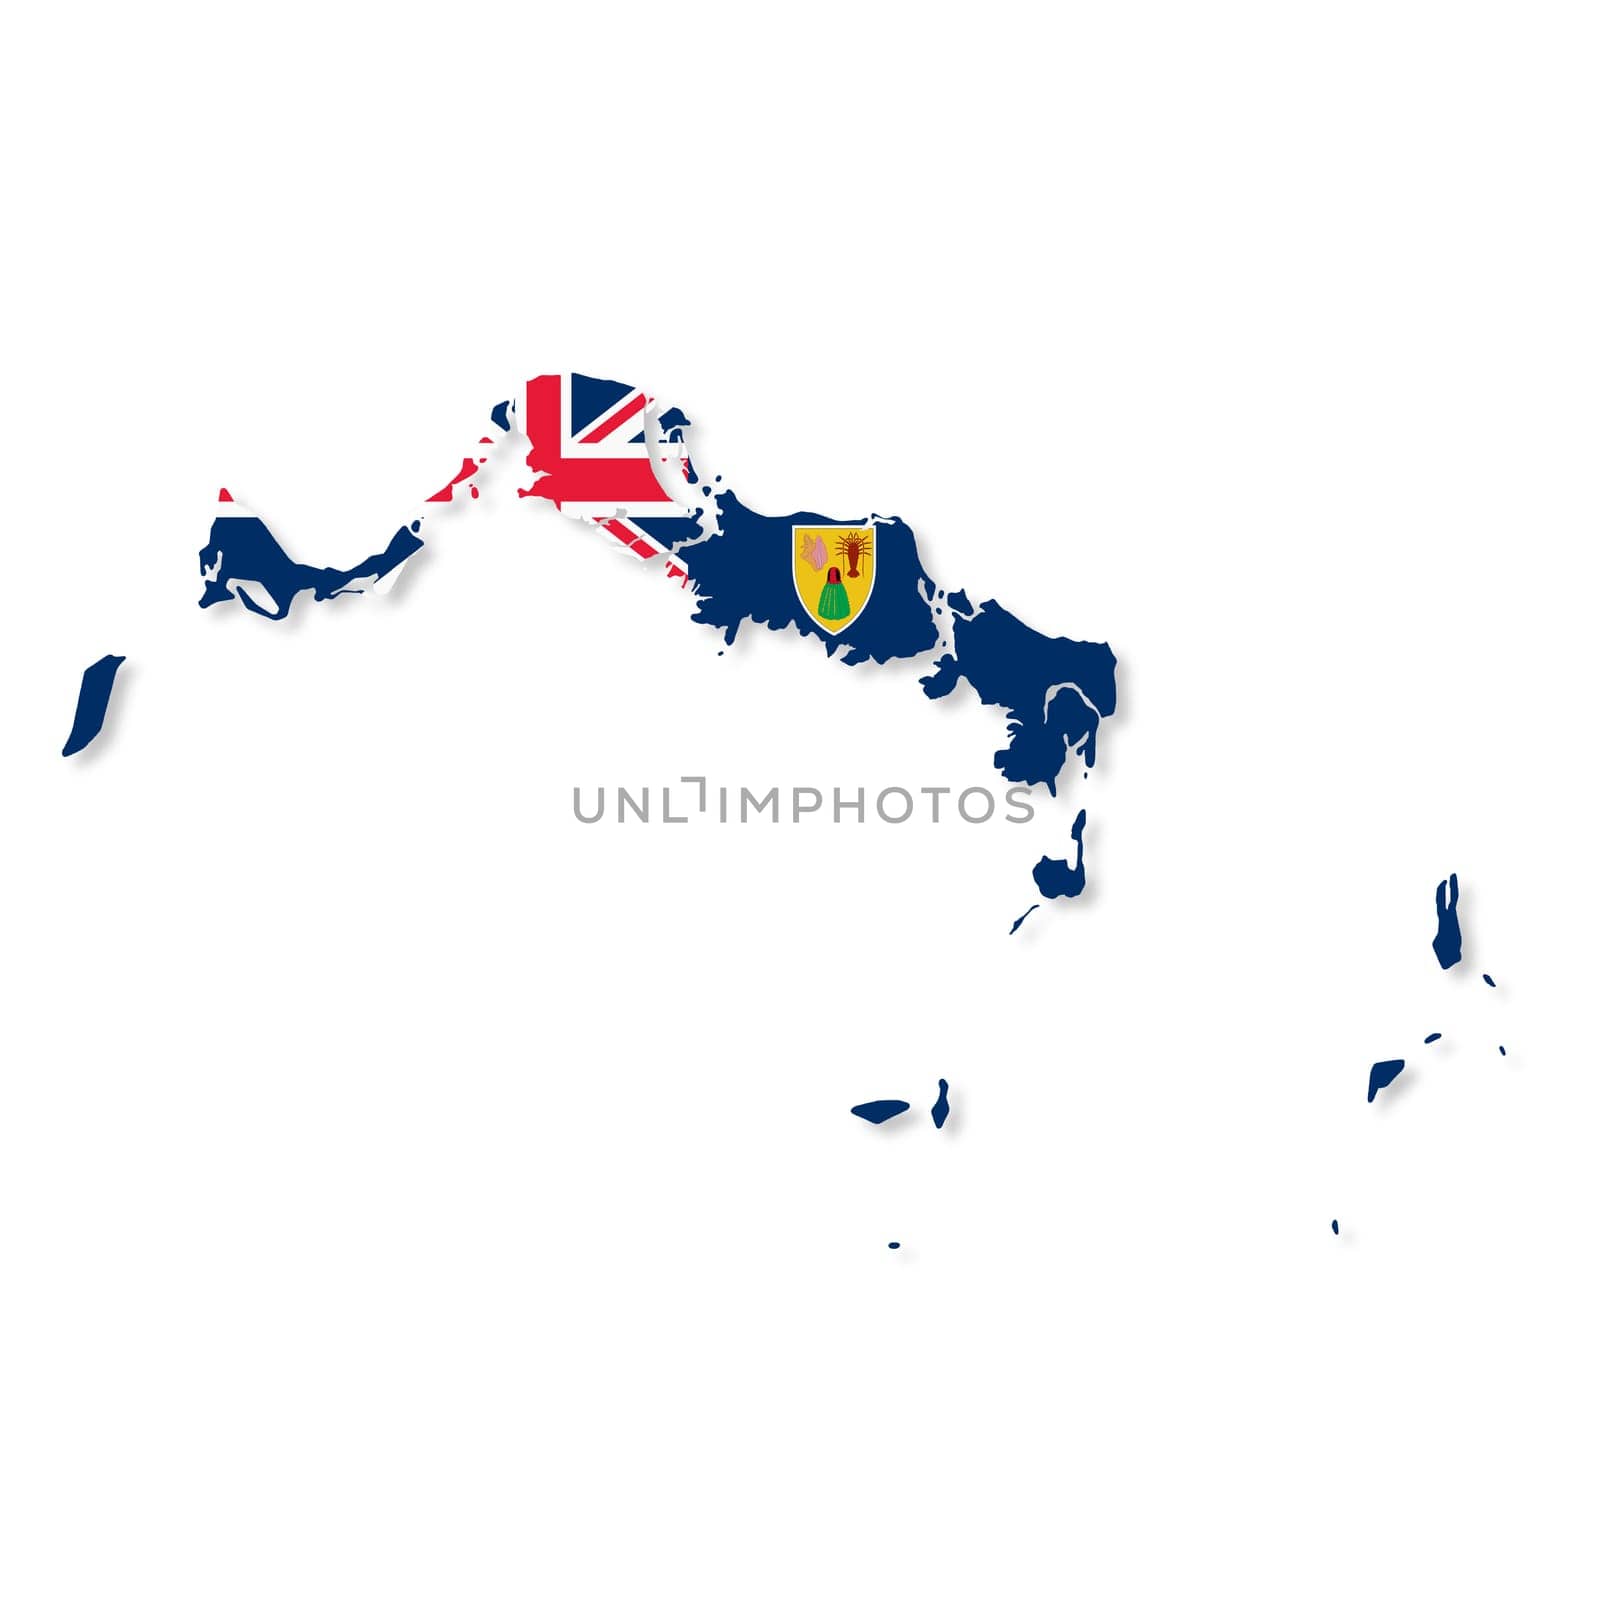 Turks and Caicos Islands flag map by VivacityImages